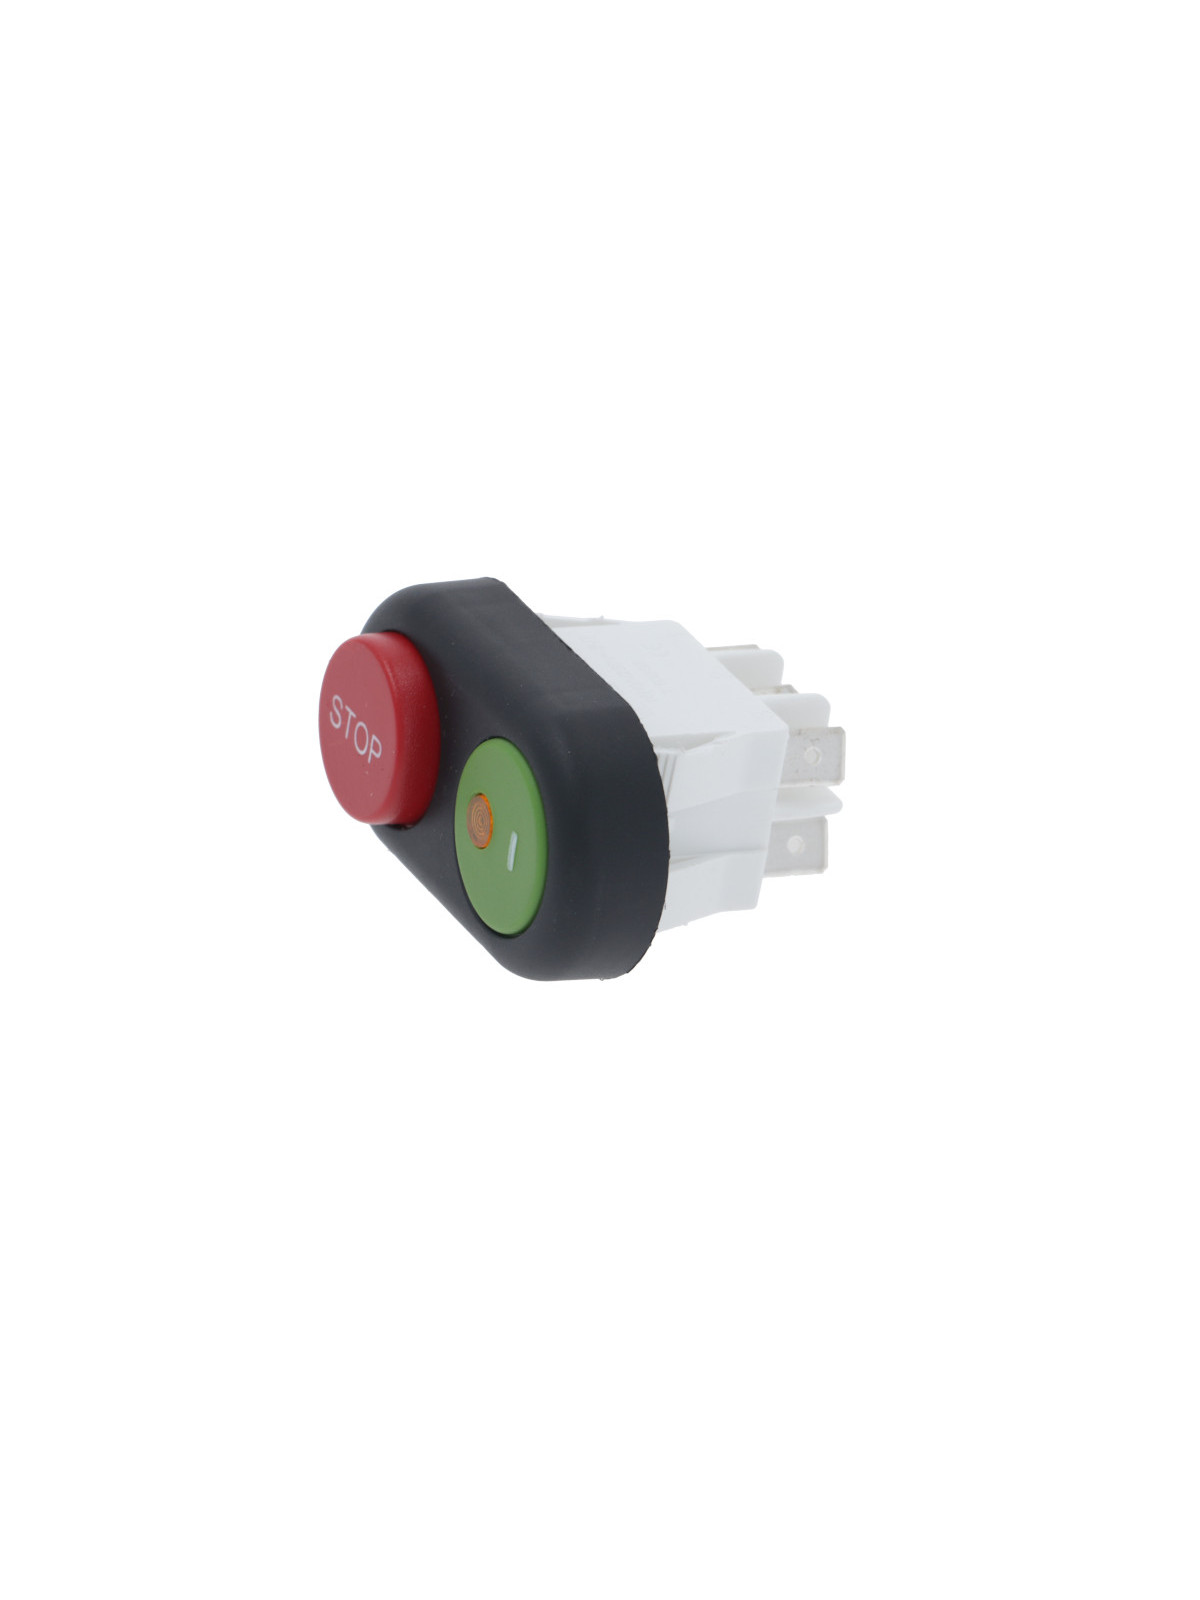 Clavier 2 touches verte / rouge 22x30mm - Trancheuse 